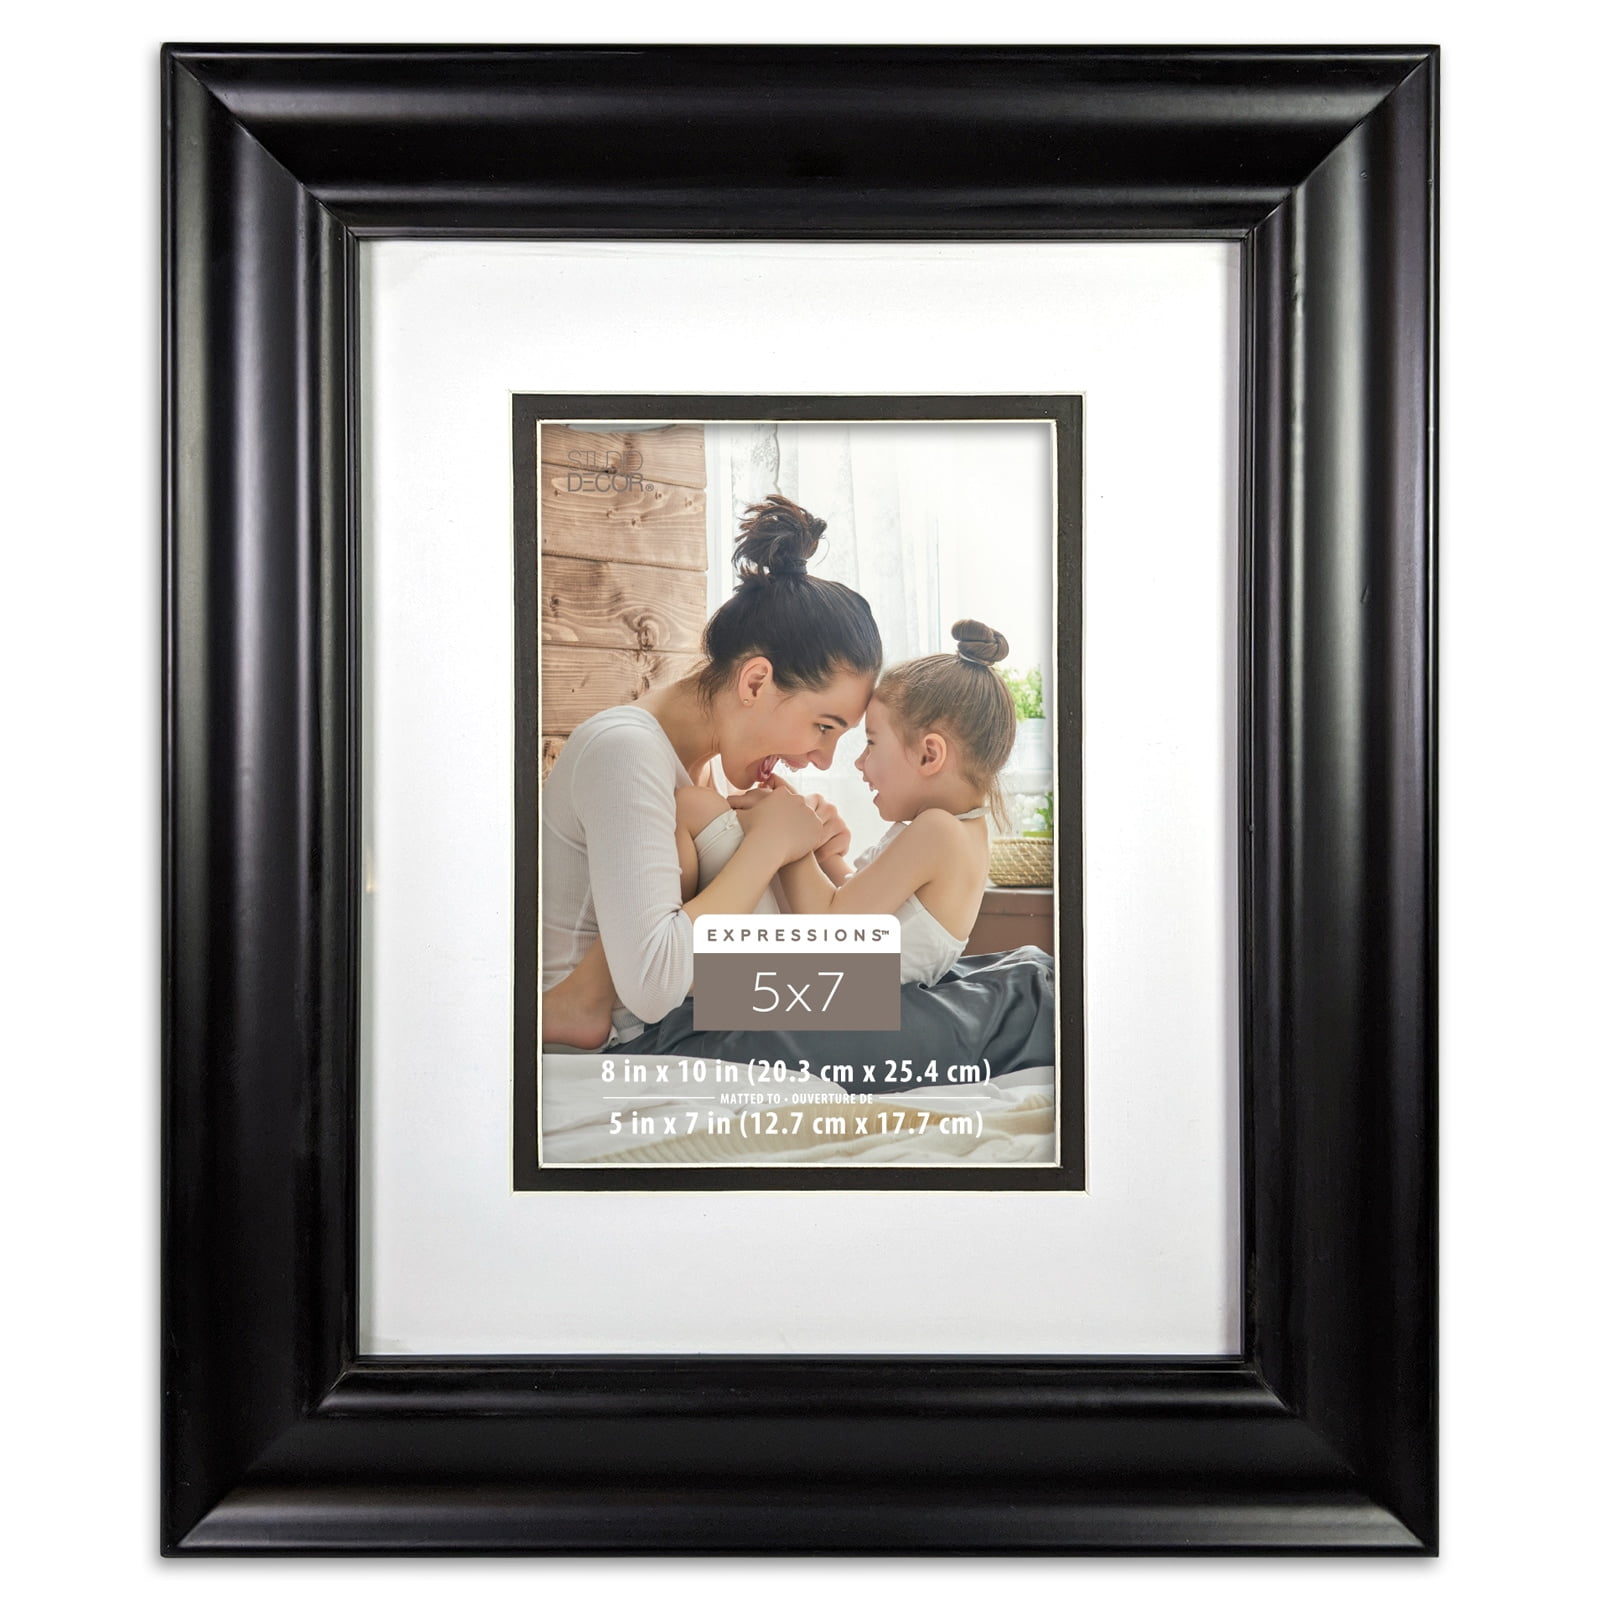 PA Framing Acid Free Photo Mat Board, 5 x 7 frame for 4 x 6 inches  picture mats, beveled ivory mats with cream core fits 5x7 frame with  opening for 4x6 photos